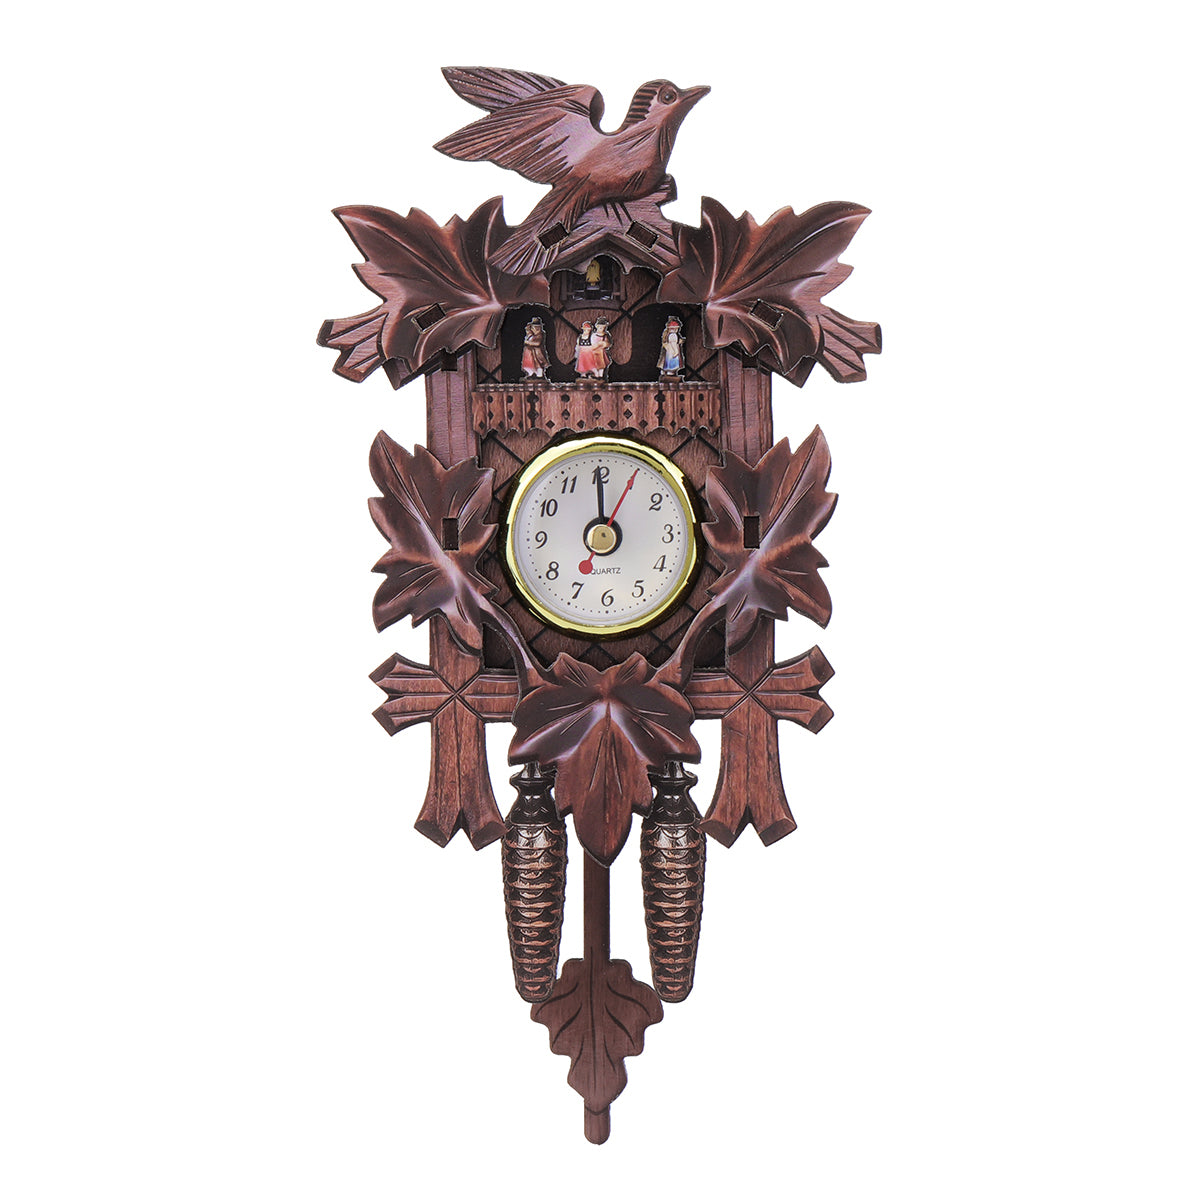 Bird Decorations Home Cafe Art Chic Swing Vintage Black Forest Cuckoo Wall Clock